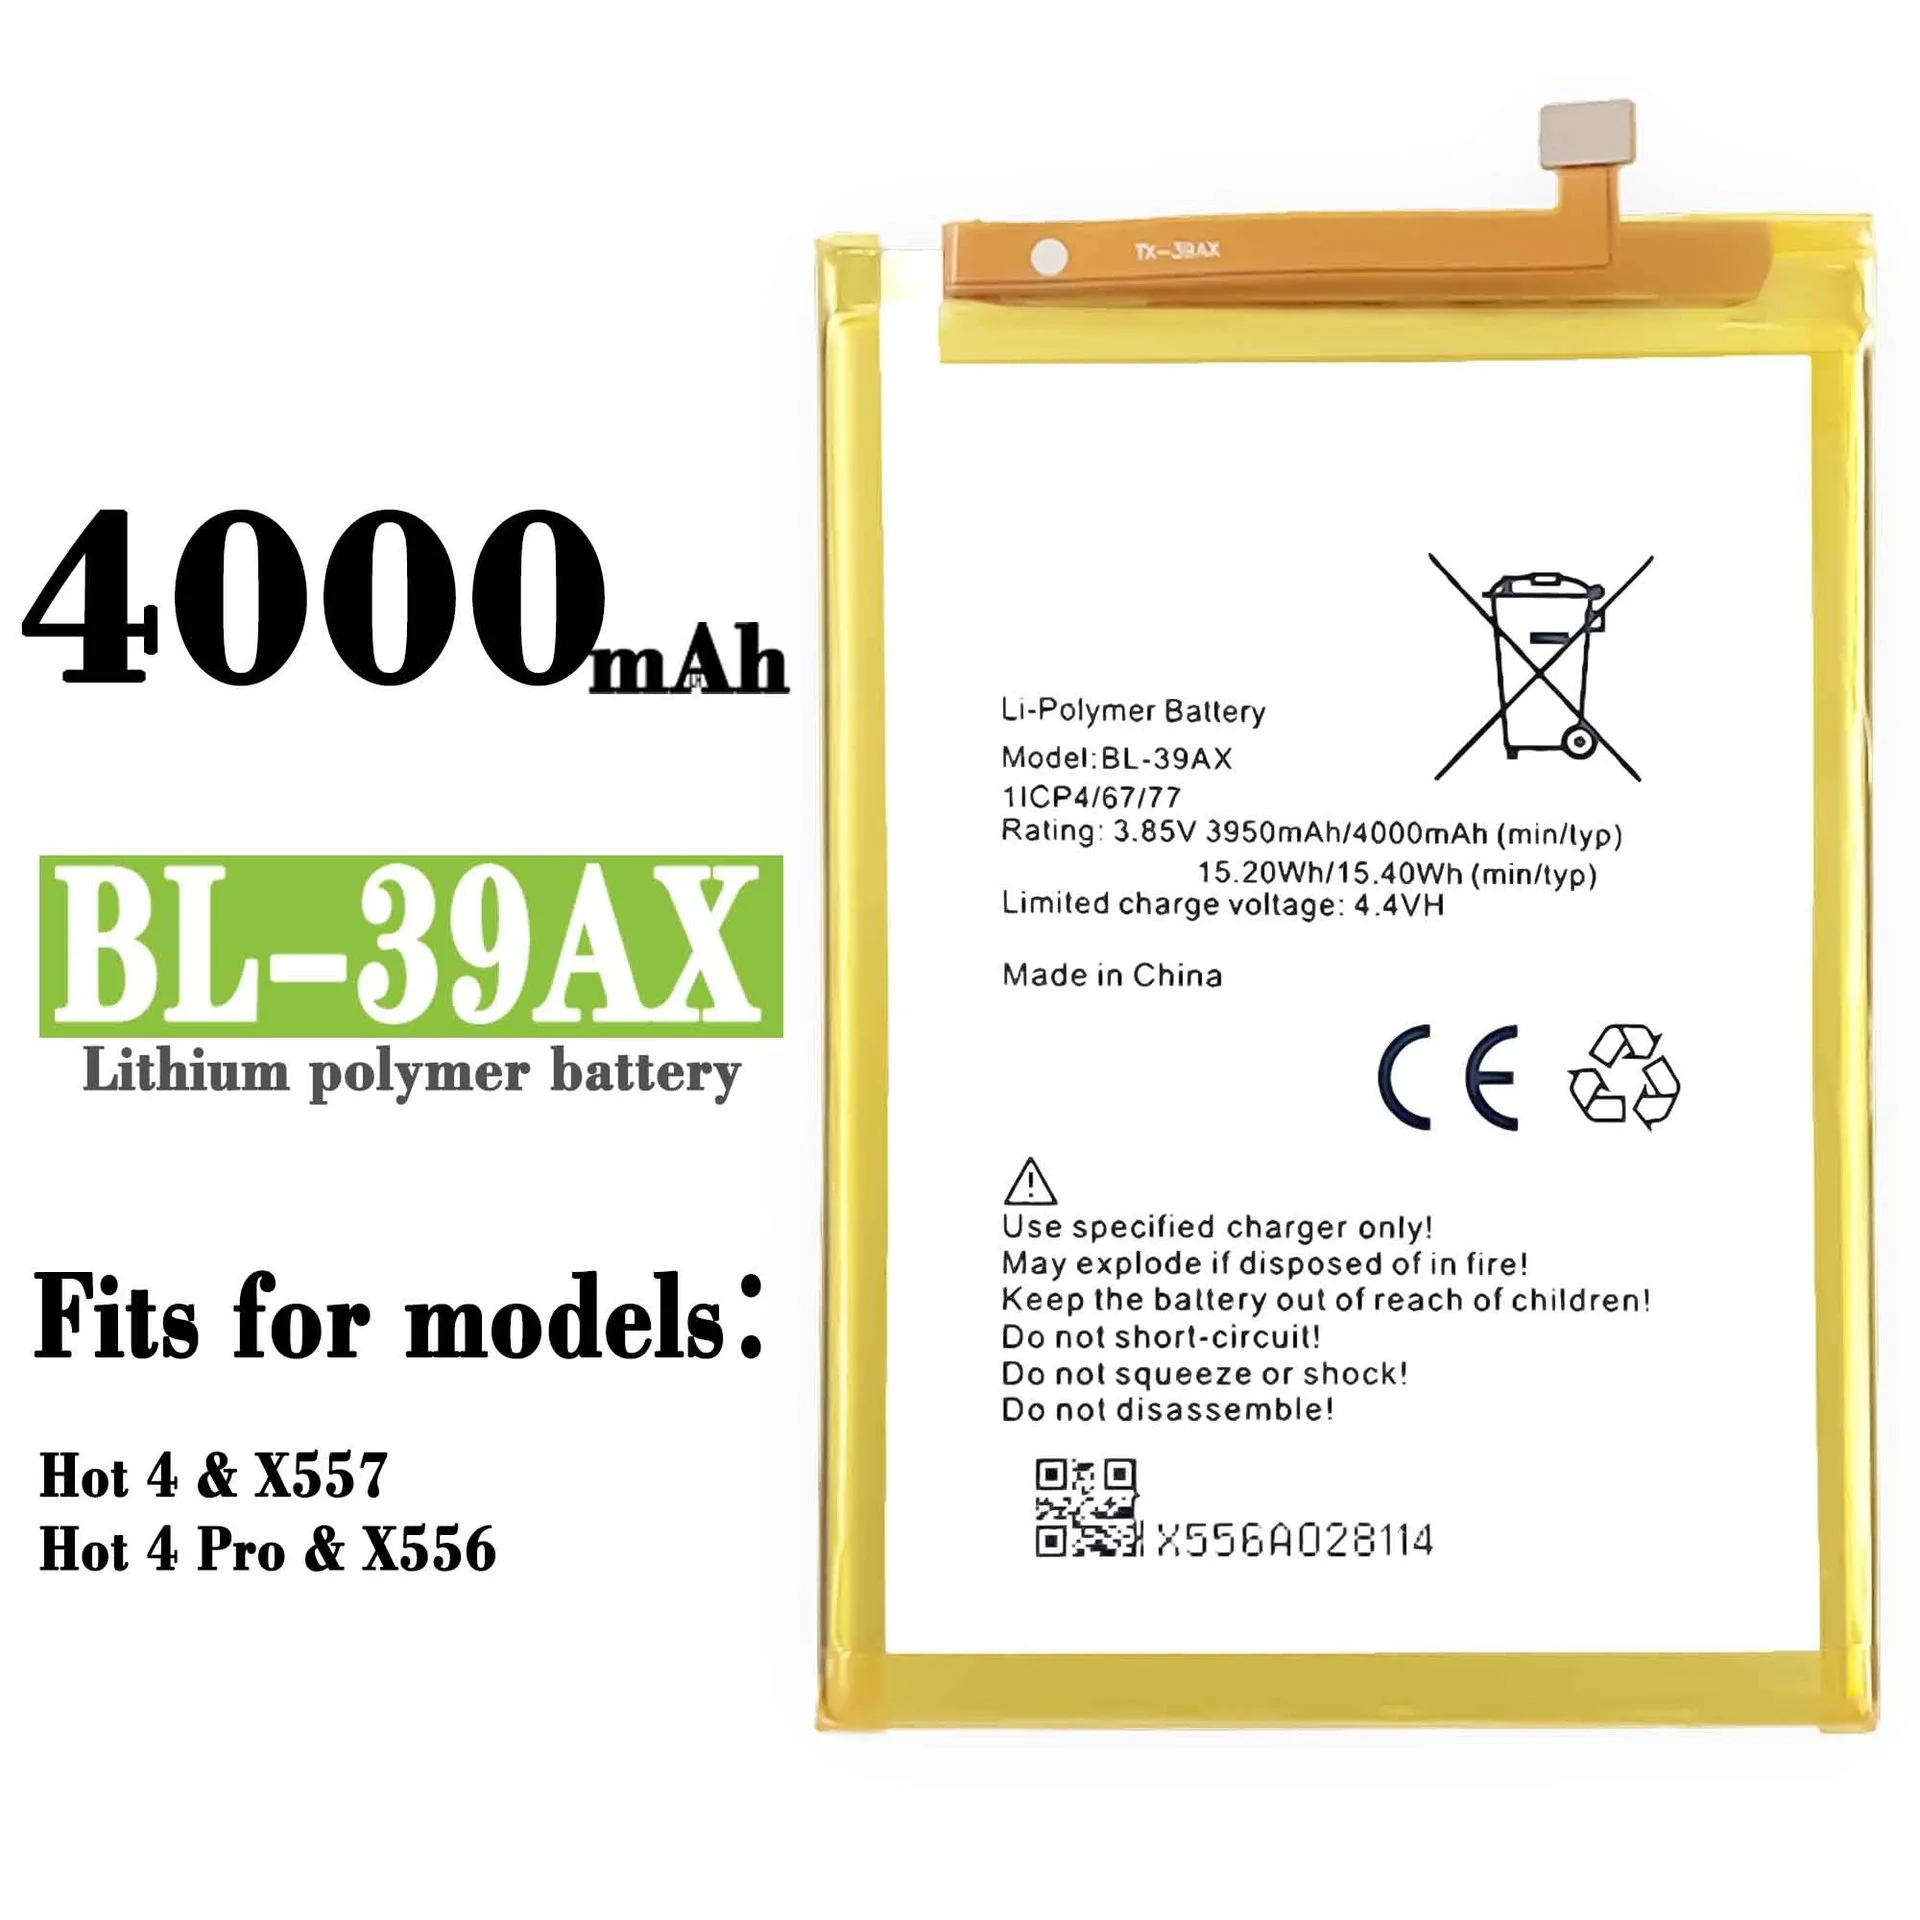 

Applicable infinix X557 / X556 / HOTE4 Pro / Hot 4 BL-39AX built-in mobile phone lithium battery